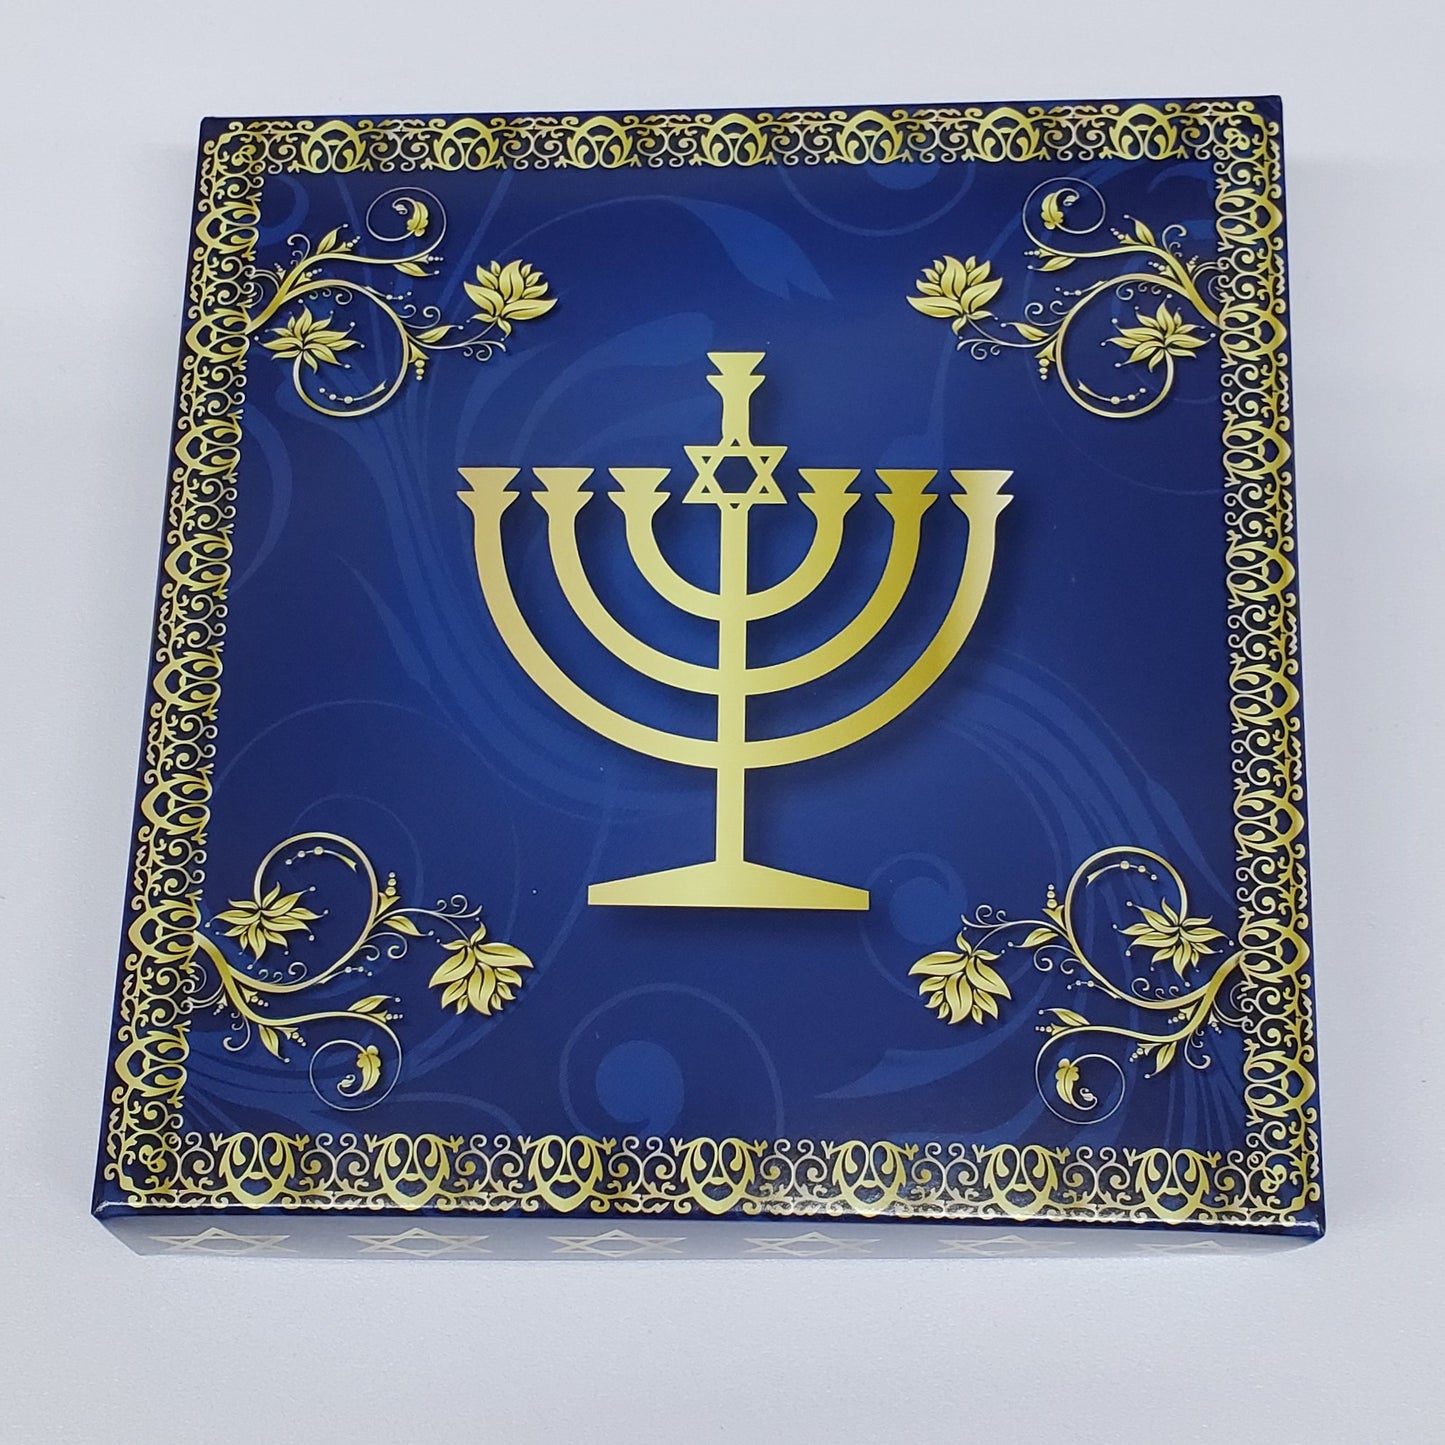 Hanukkah Themed Box Cover for 16 Piece Holiday Assortment